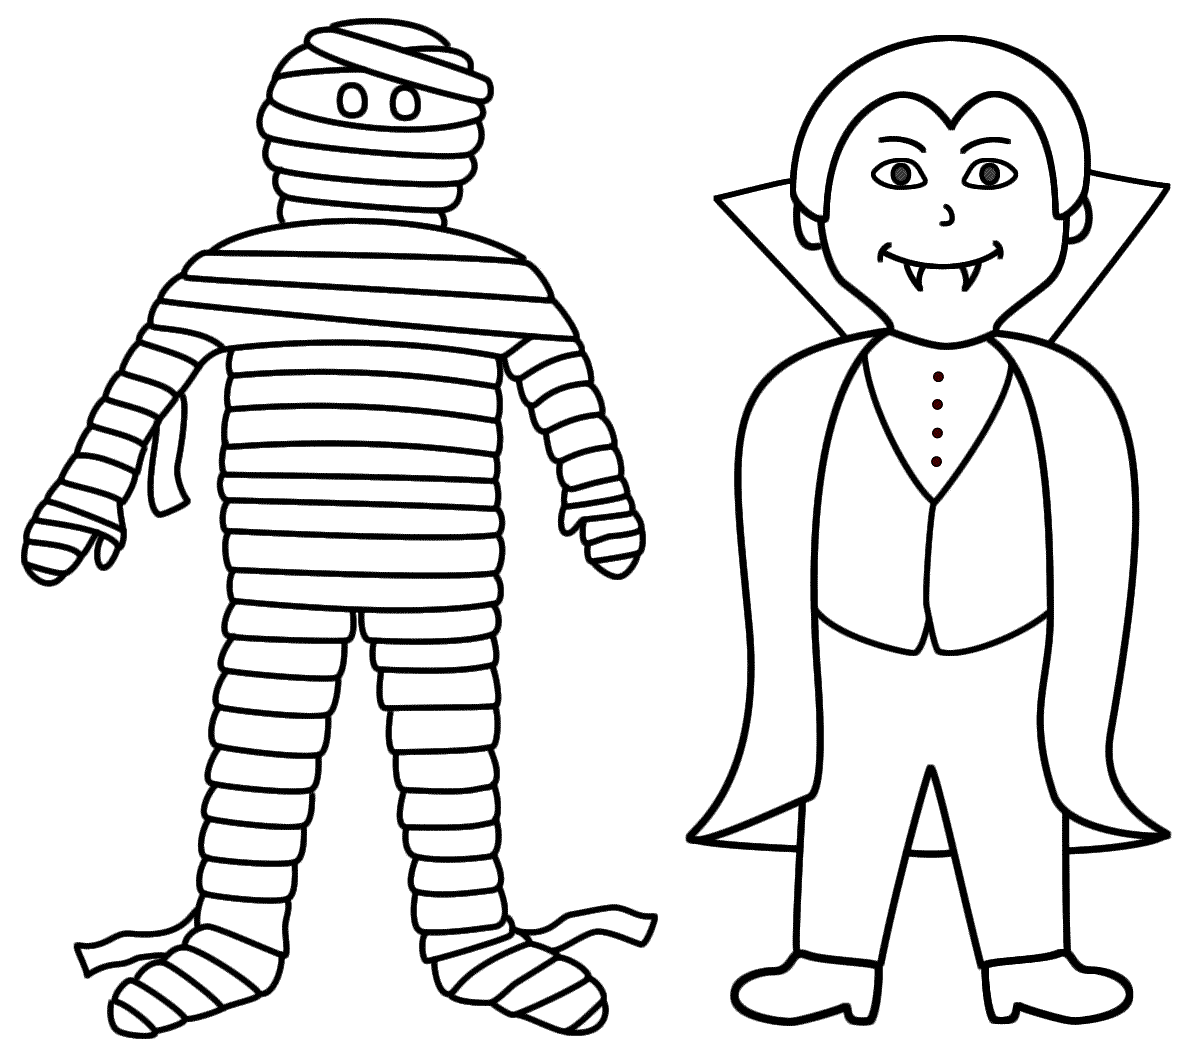 Mummy with a vampire - Coloring Page (Halloween)